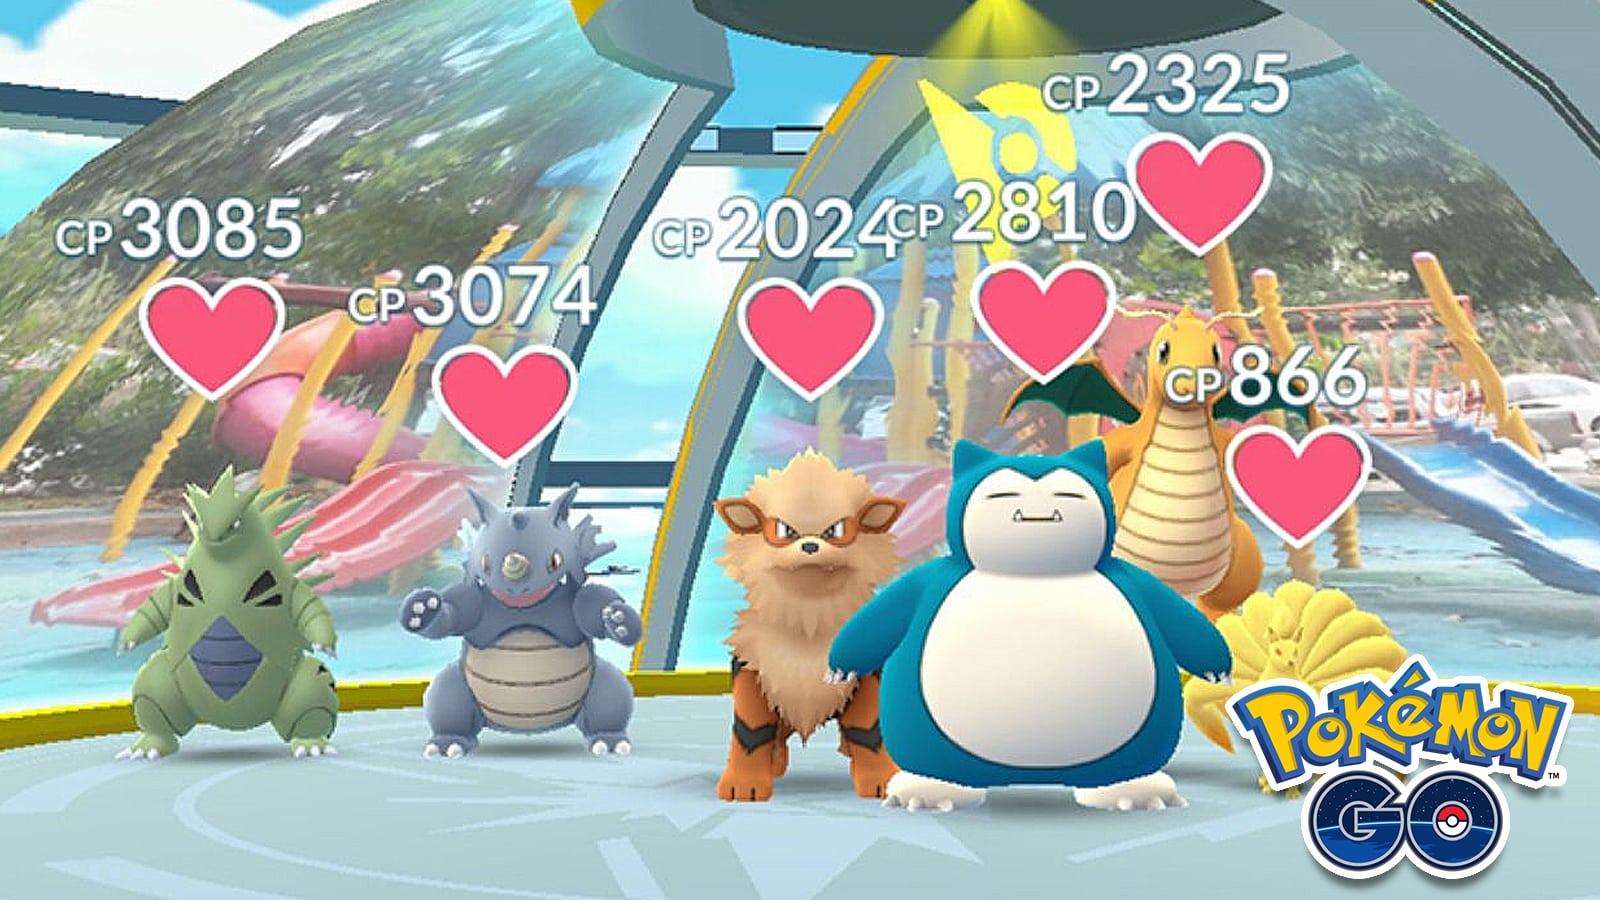 Simple Pokemon Go feature rework would solve "inactive" Gym problem